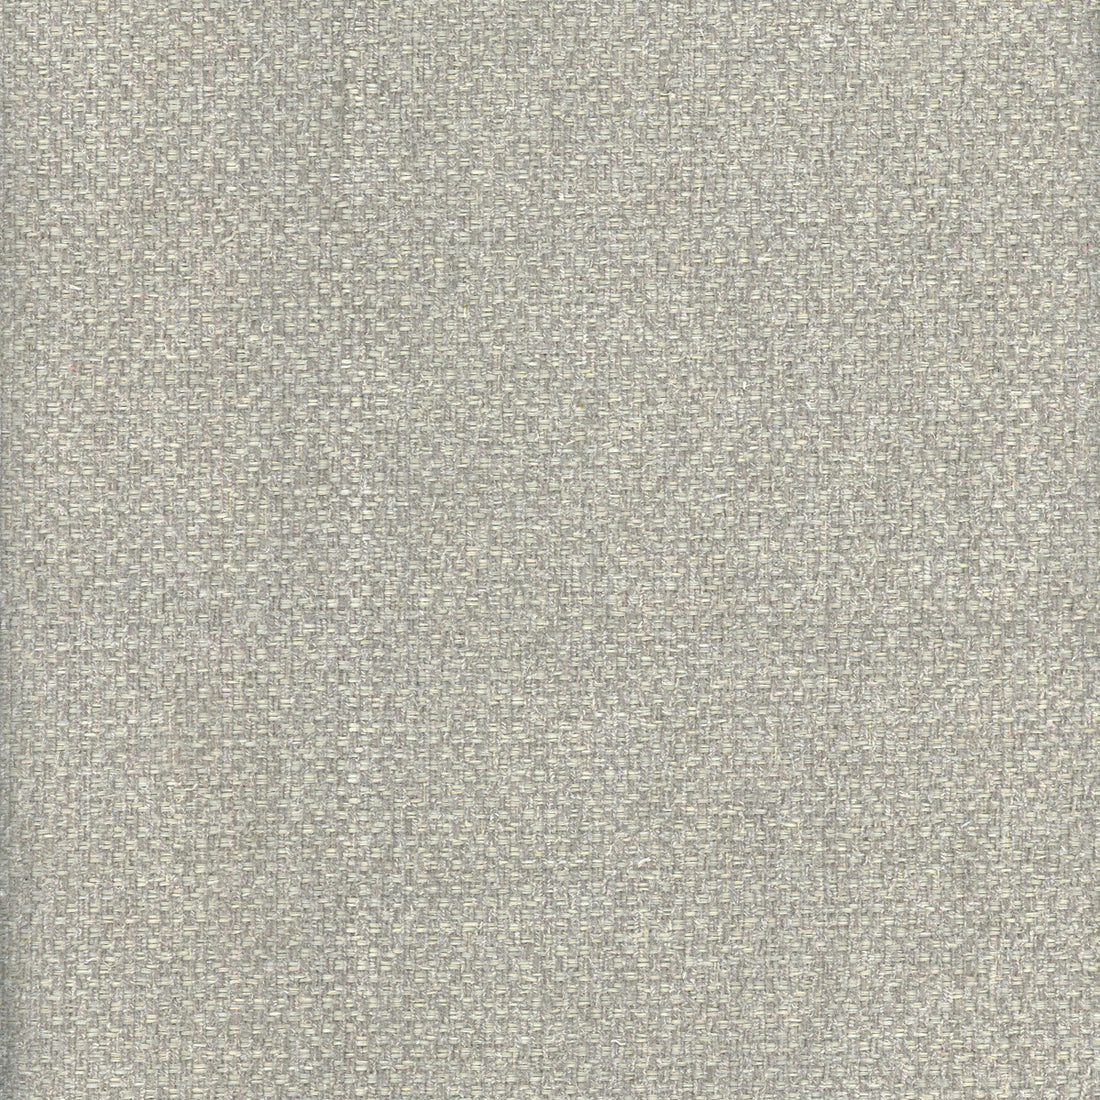 Yosemite fabric in pebble color - pattern AM100332.11.0 - by Kravet Couture in the Andrew Martin Canyon collection